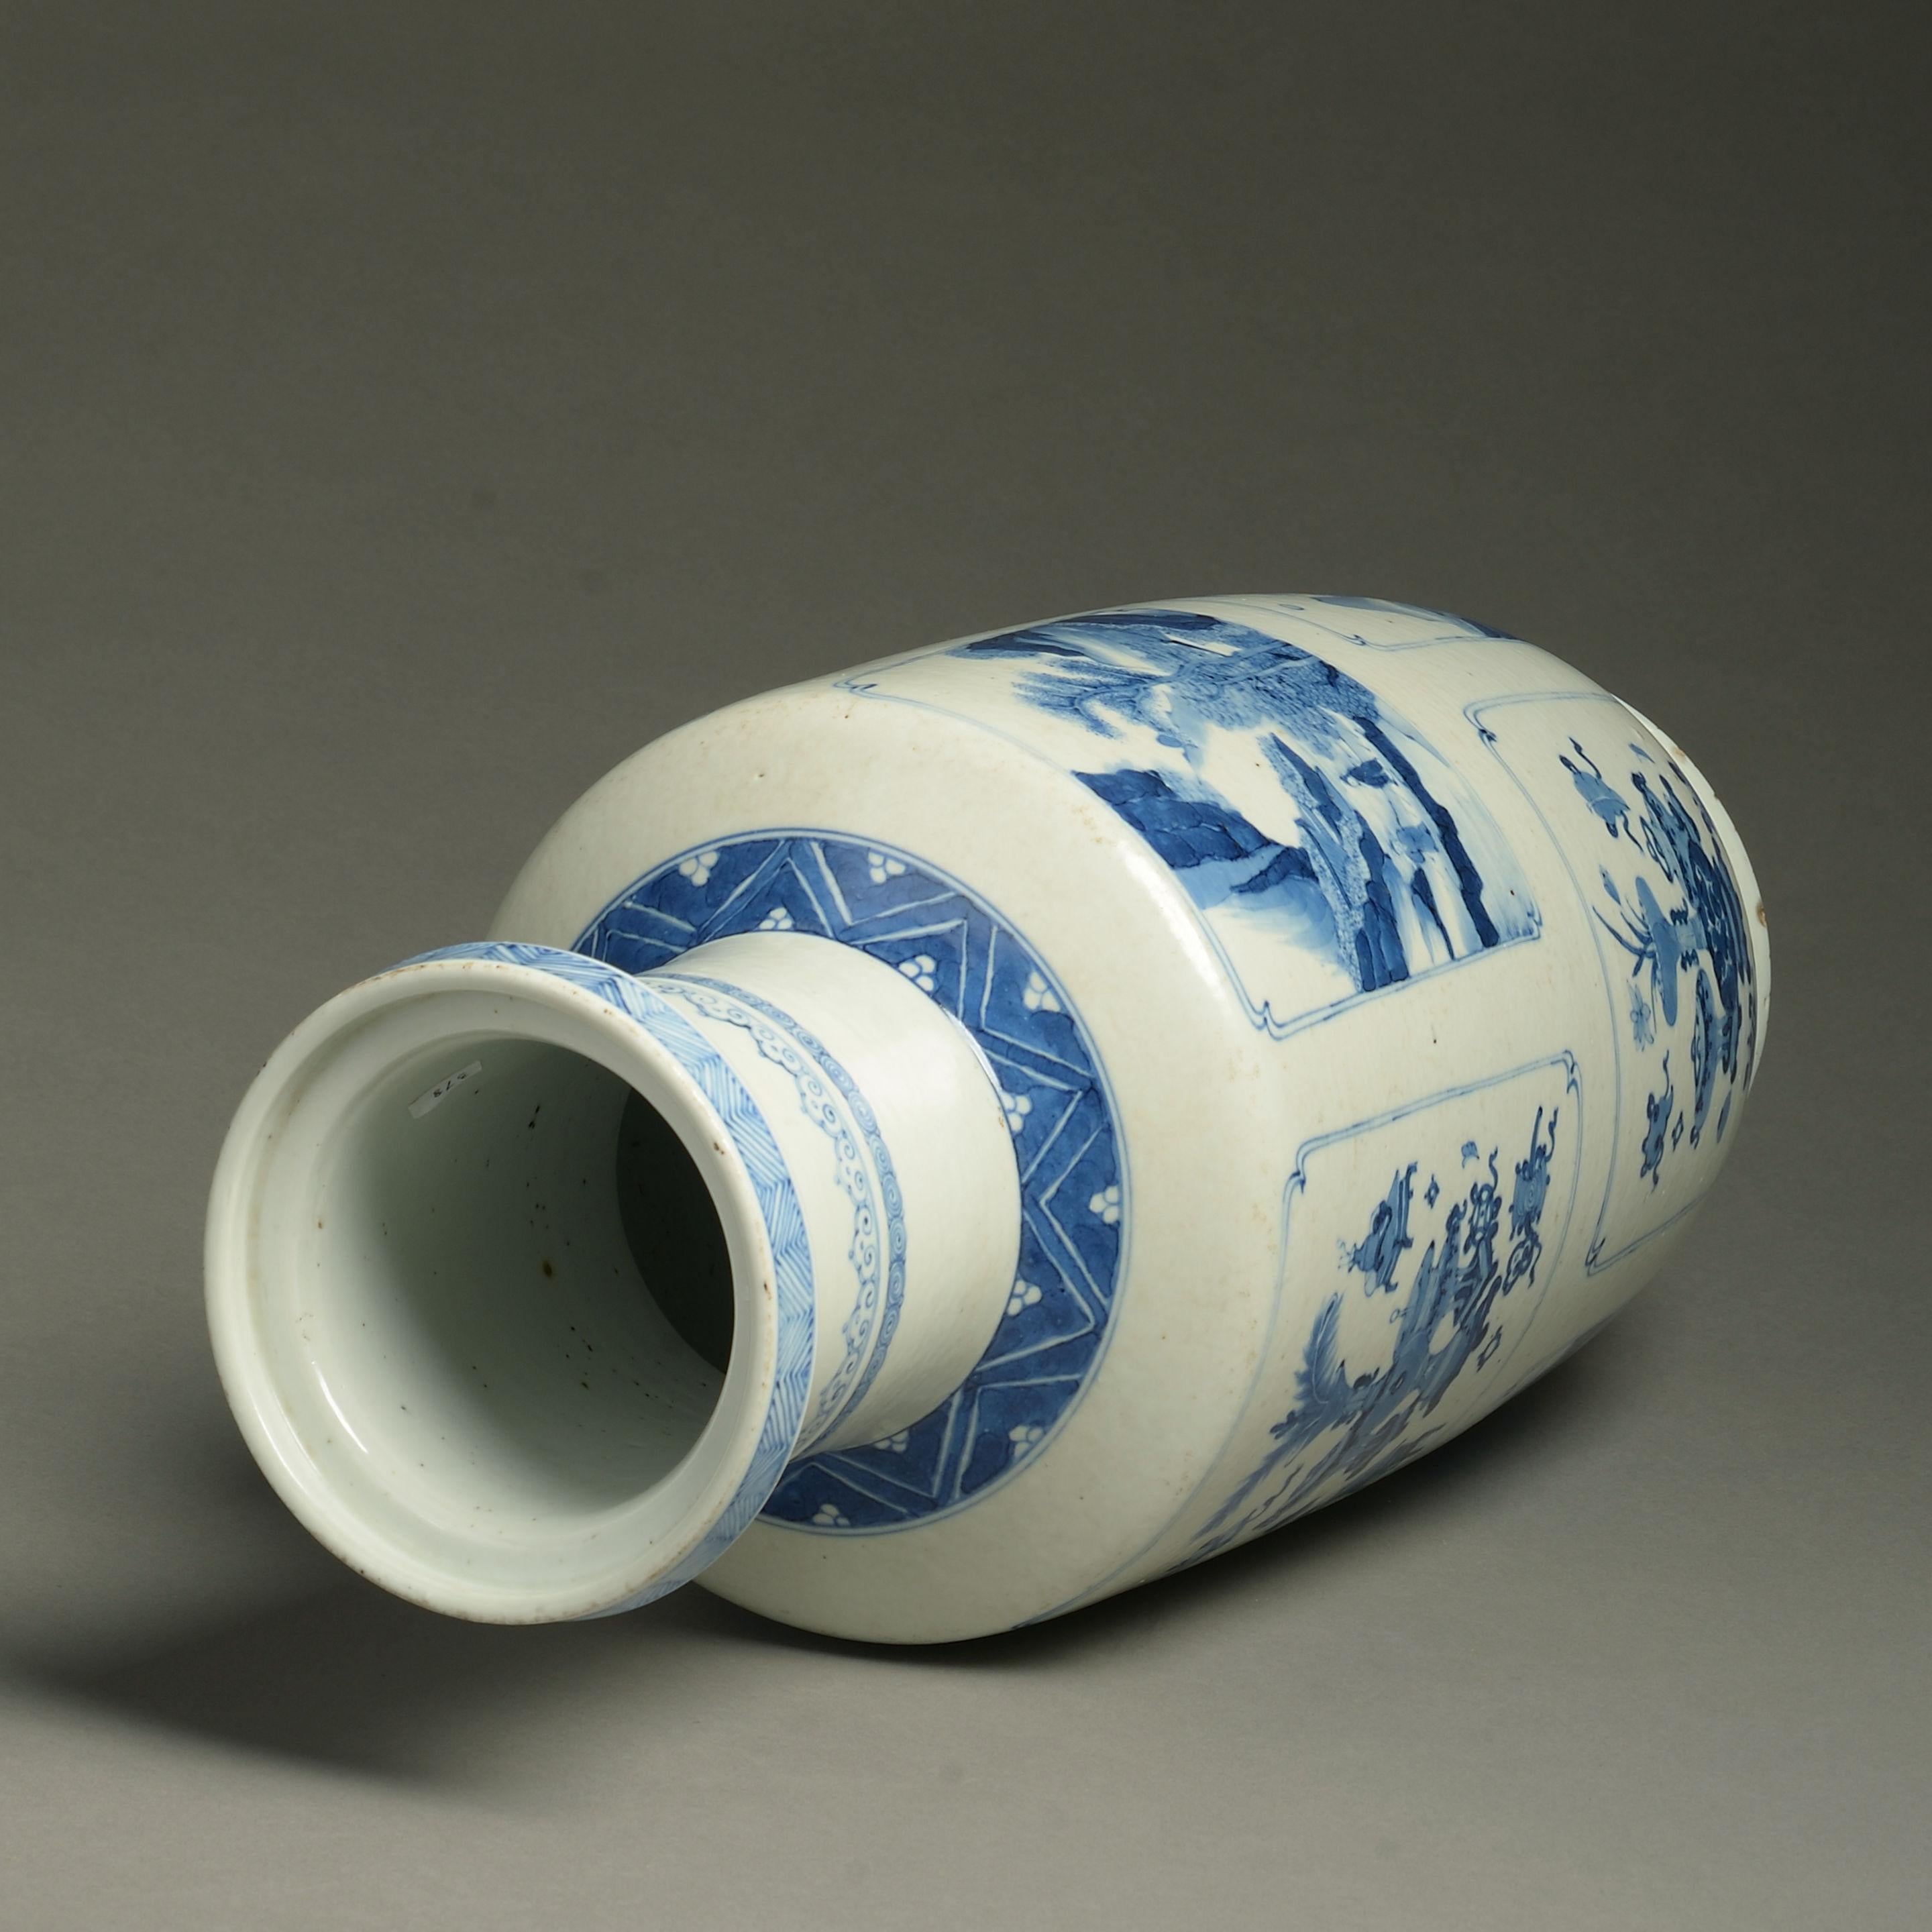 Late 19th Century 19th Century Blue and White Porcelain Rouleau Vase